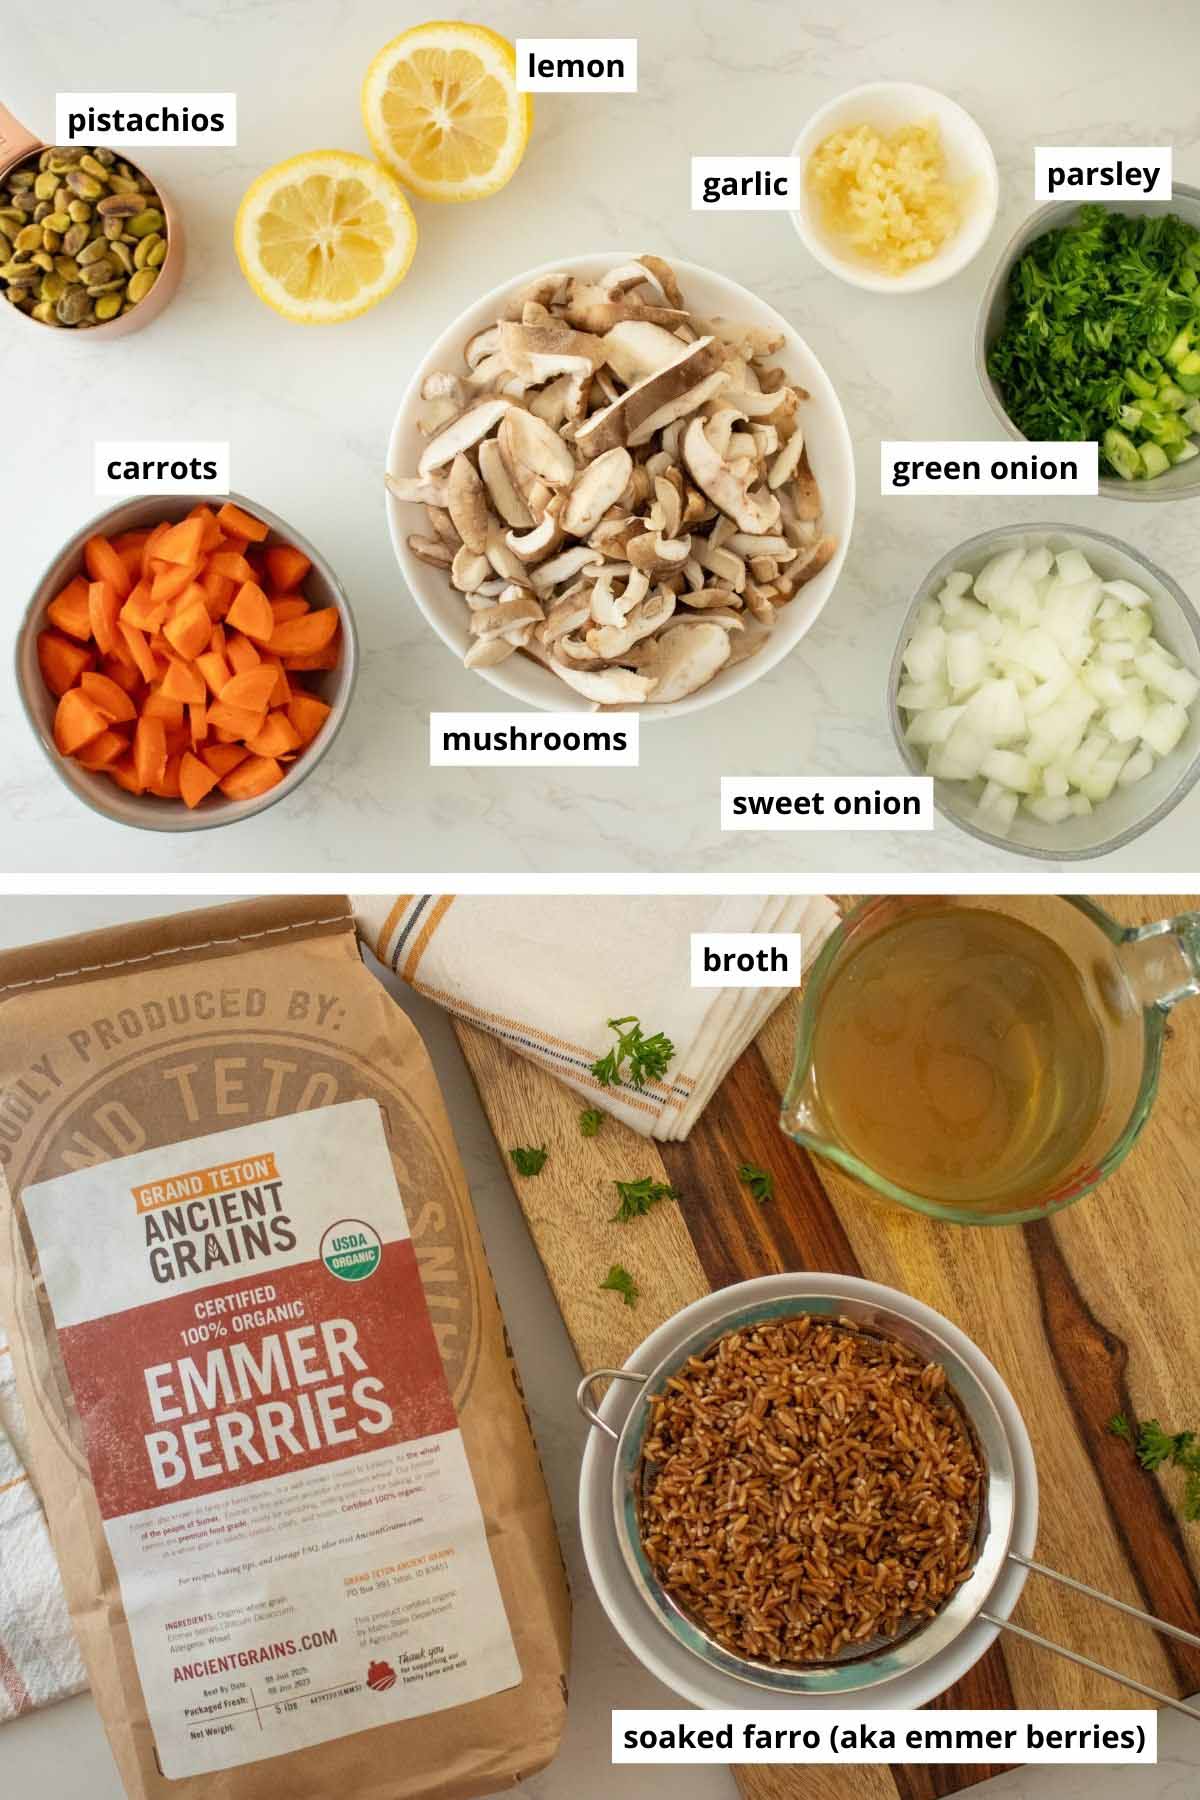 veggies, pistachios, seasonings, broth, and farro in bowls with text labels on each ingredient